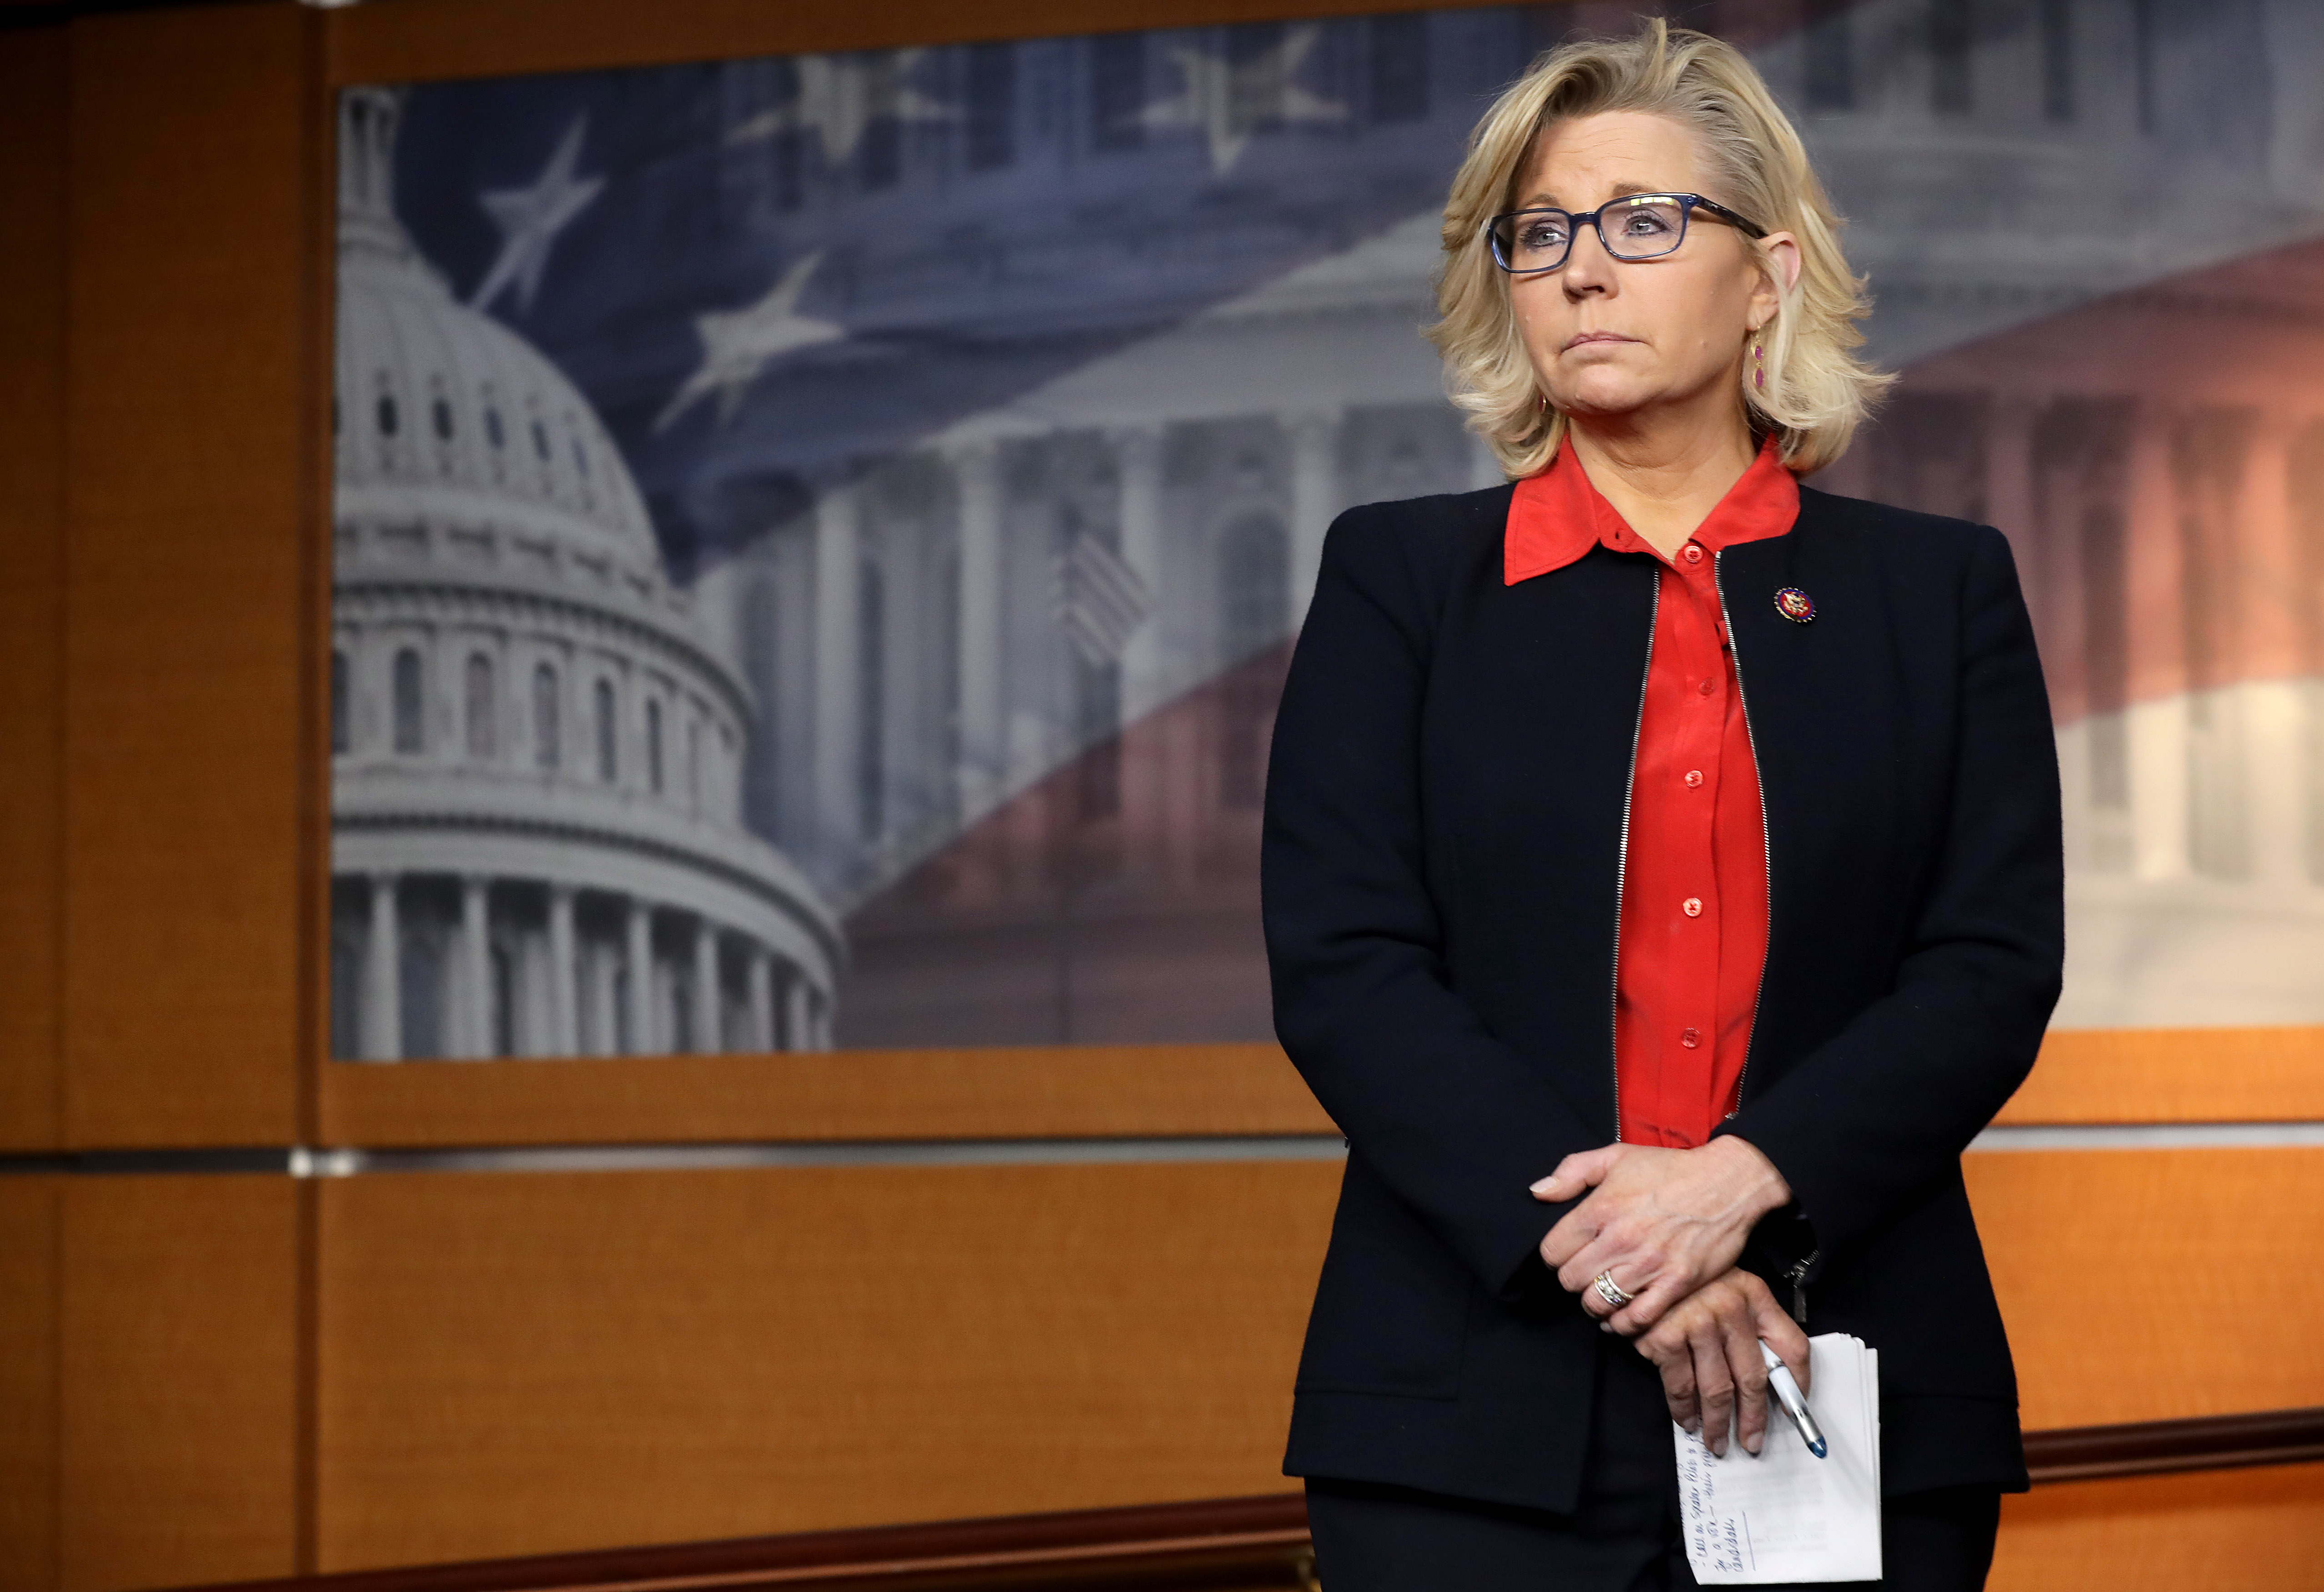 House Republican Conference Chair Rep. Liz Cheney attends a news conference following a GOP caucus meeting at the U.S. Capitol Visitors Center February 13, 2019 in Washington, DC. (Photo by Chip Somodevilla/Getty Images)